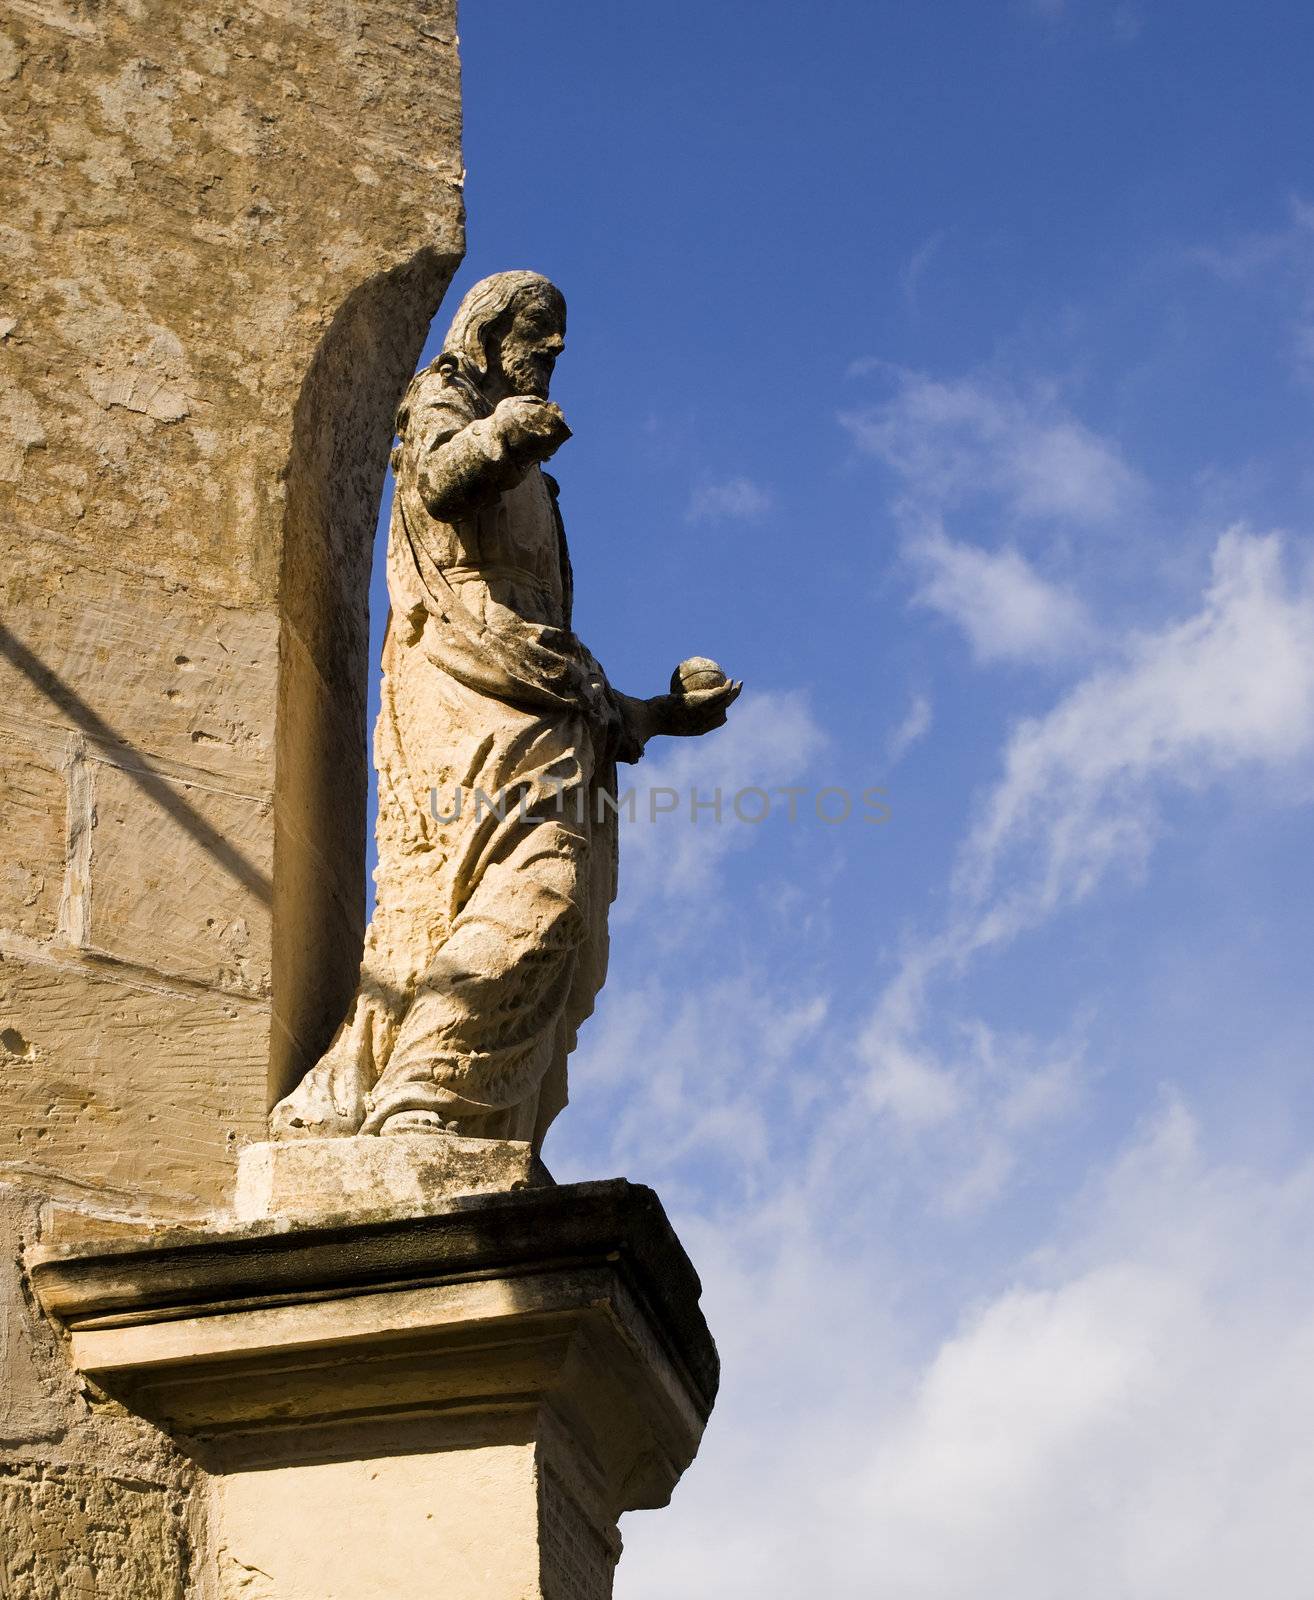 Medieval statue of Jesus in the old city of Mdina in Malta, on public National Cathedral Museum